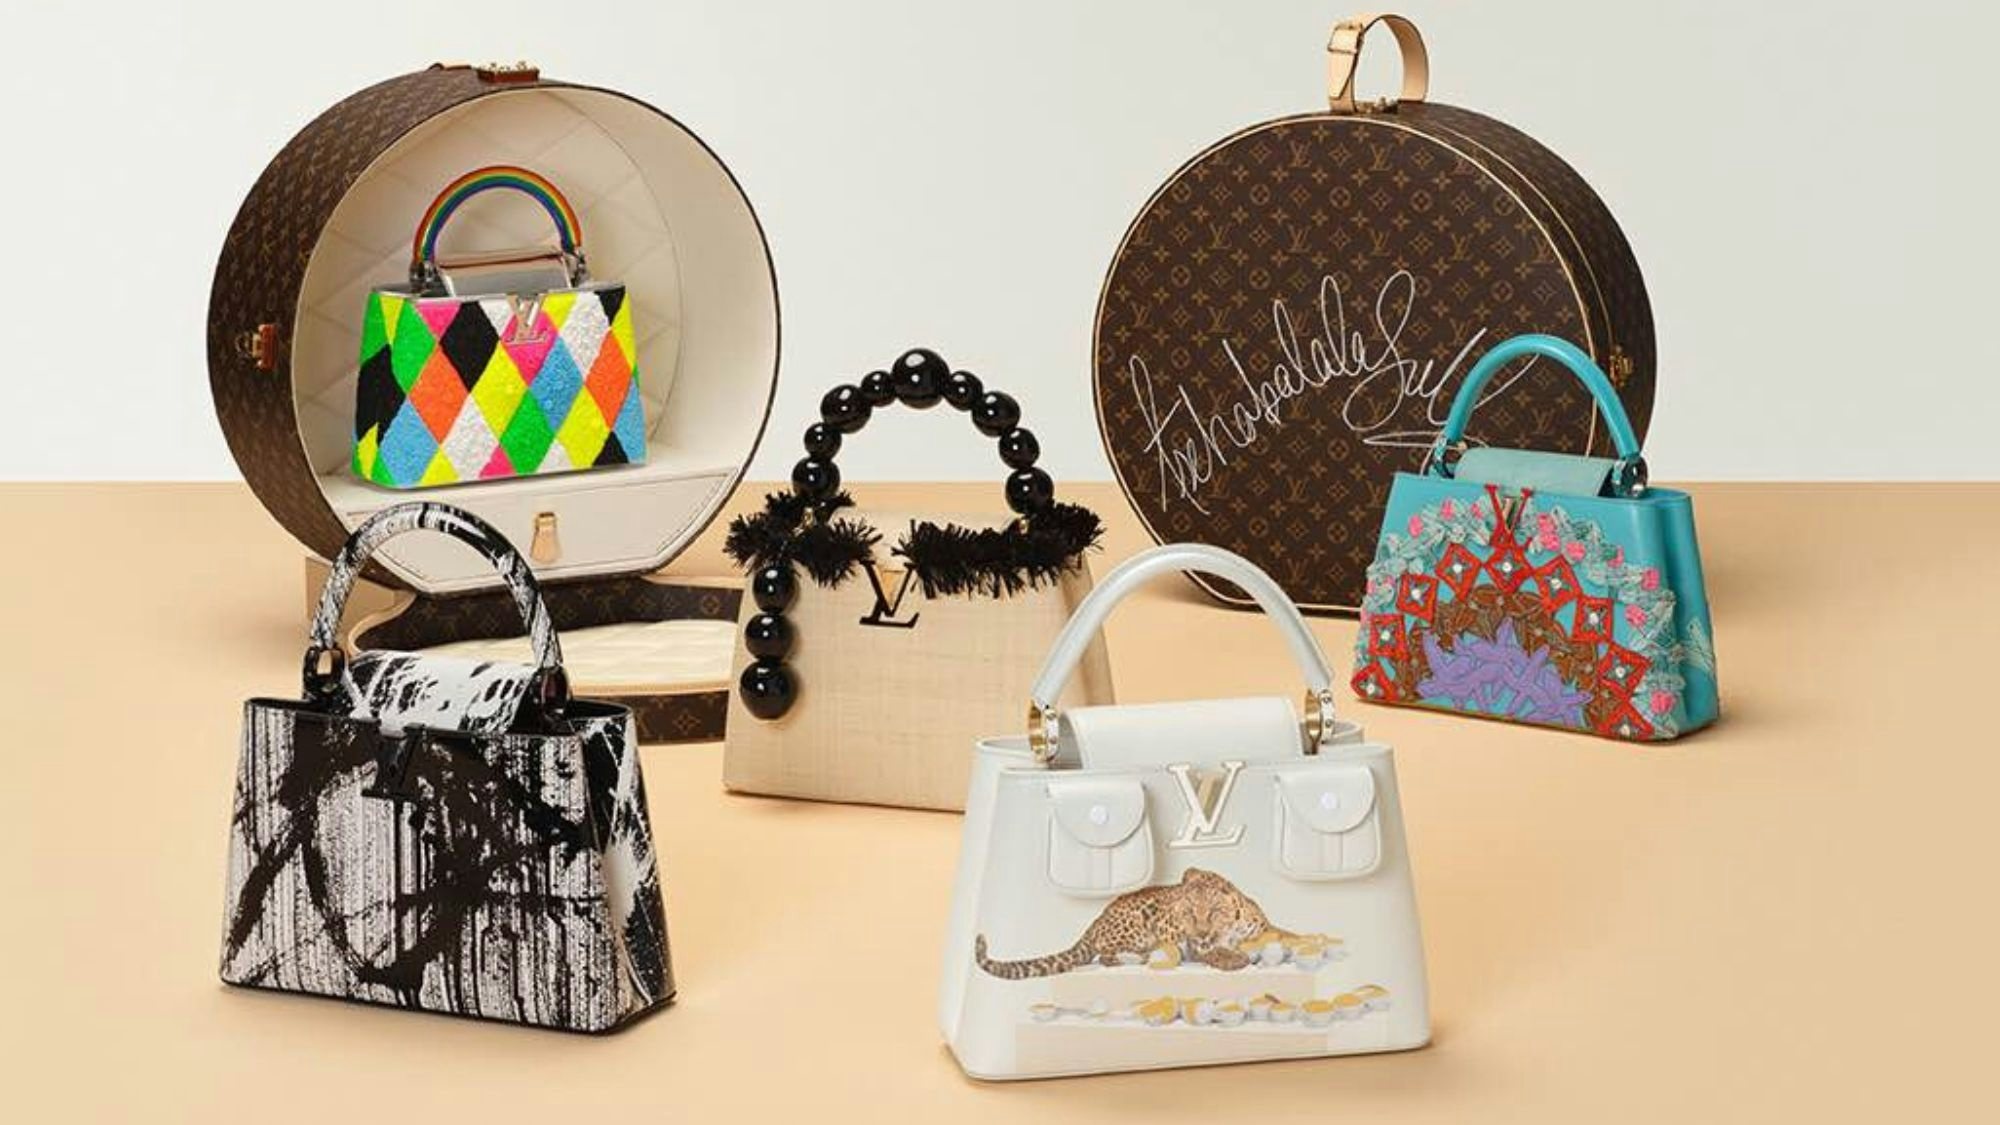 The Artycapucines bag collection celebrates the Capucines design via a limited edition sale, combining cultural capital and creativity. Photo: Louis Vuitton